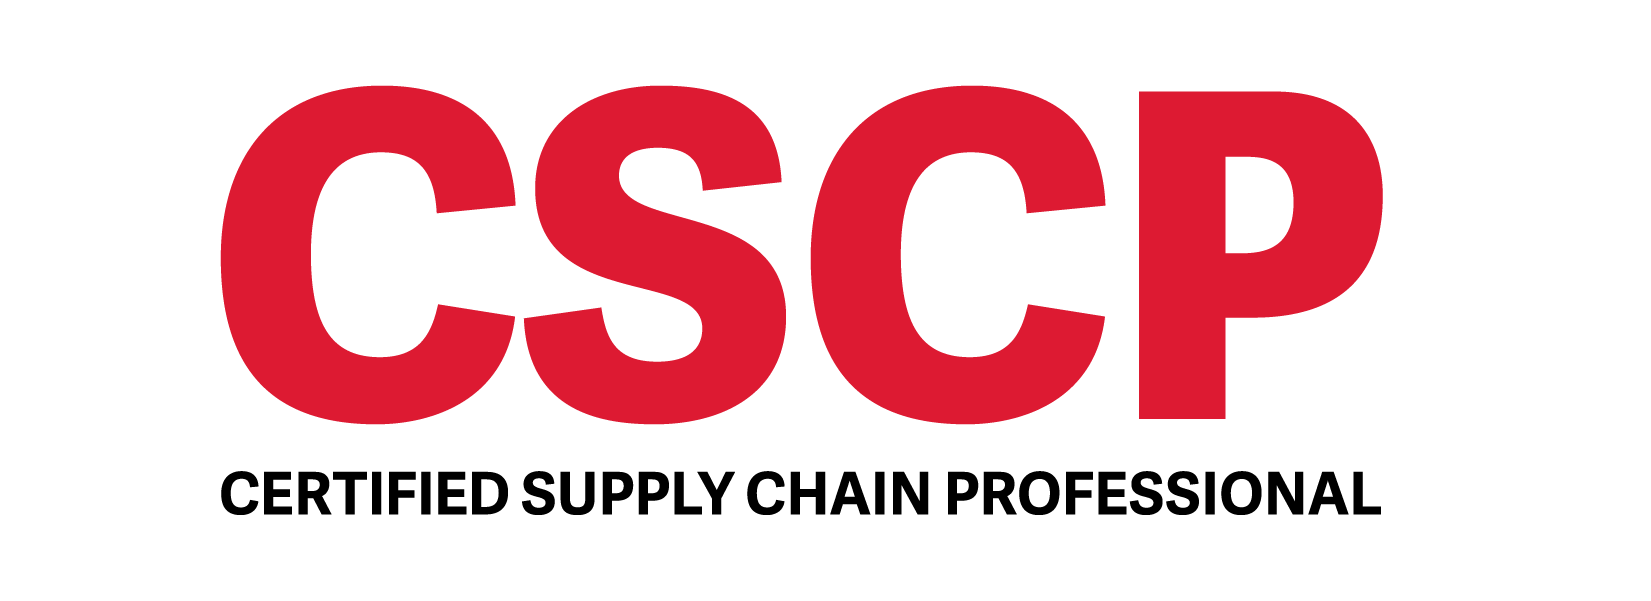 Get Guaranteed by the CSCP Inventory network Accreditation Program